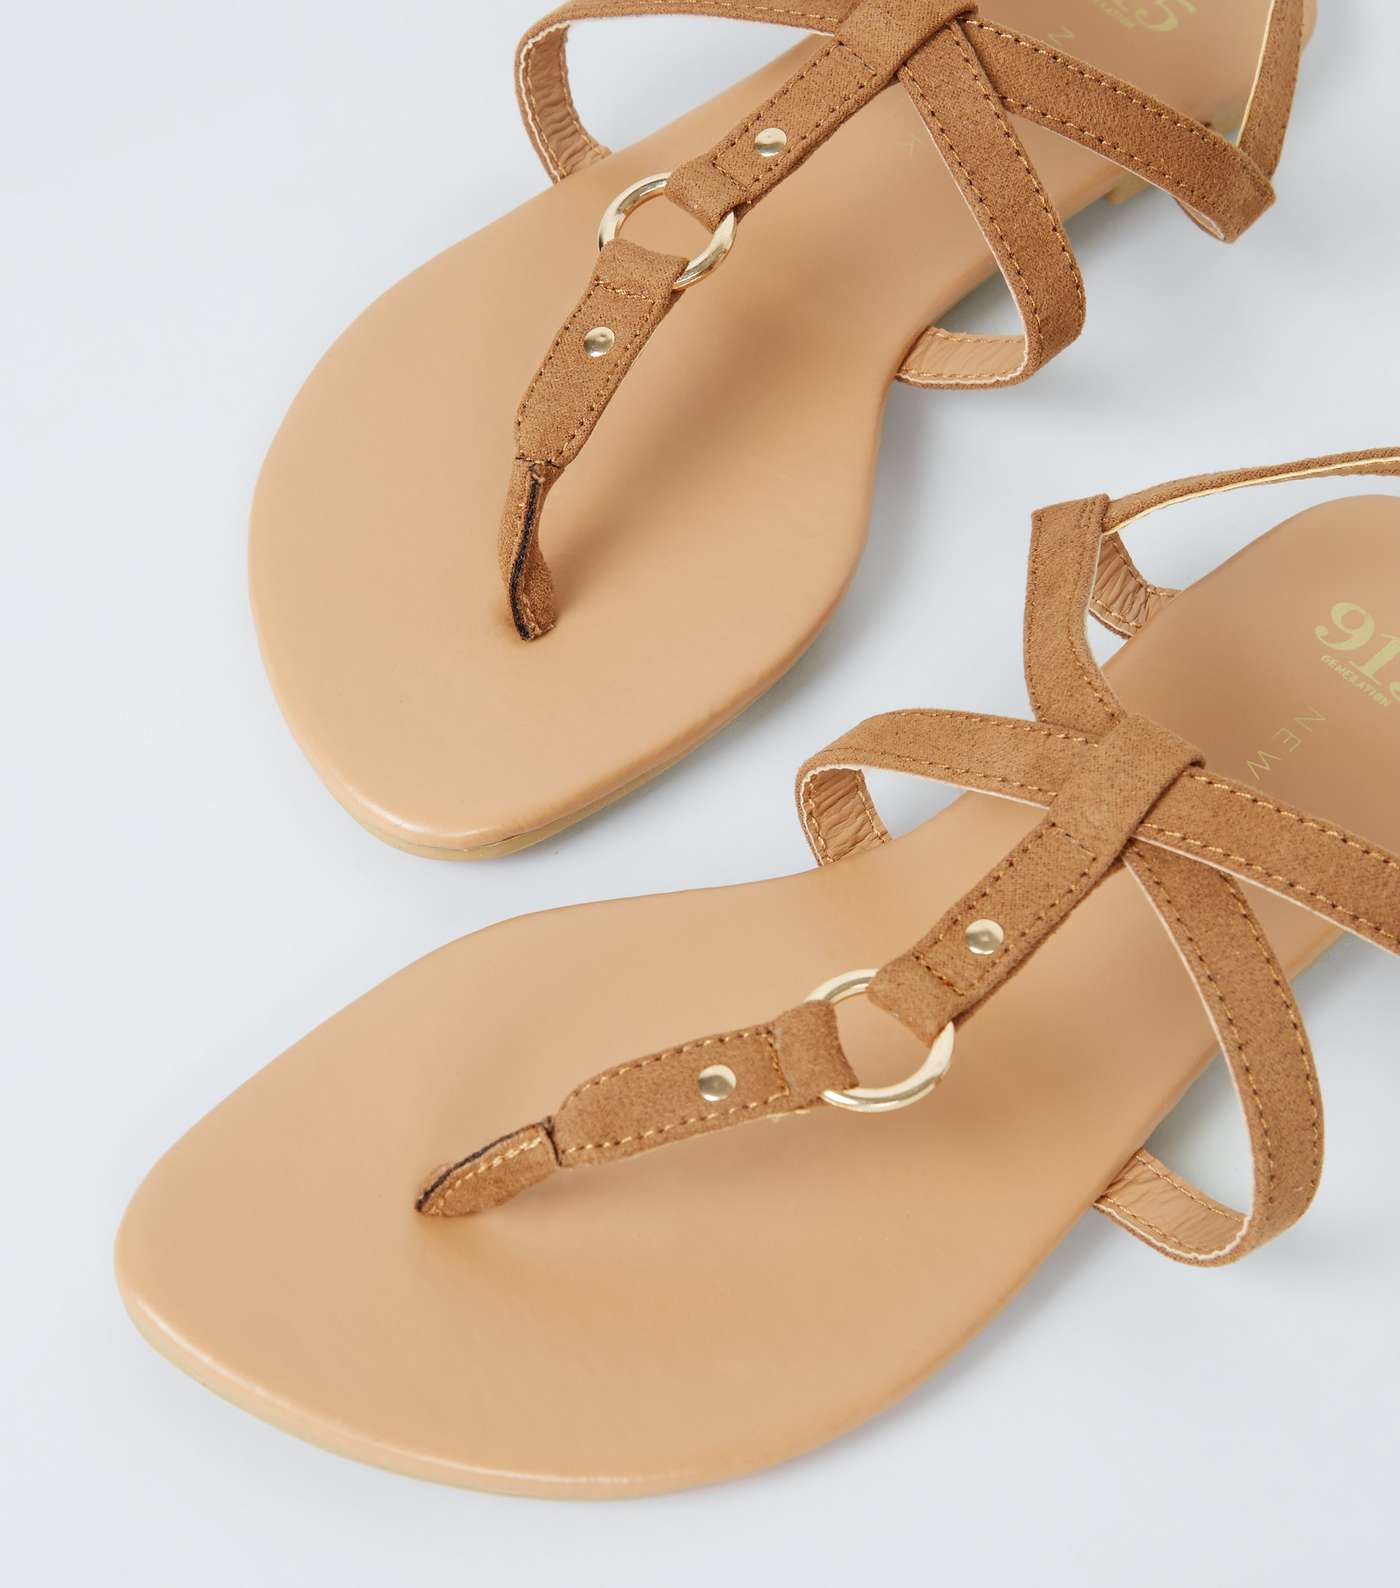 Girls Tan Leather-Look Strappy Sandals Image 4